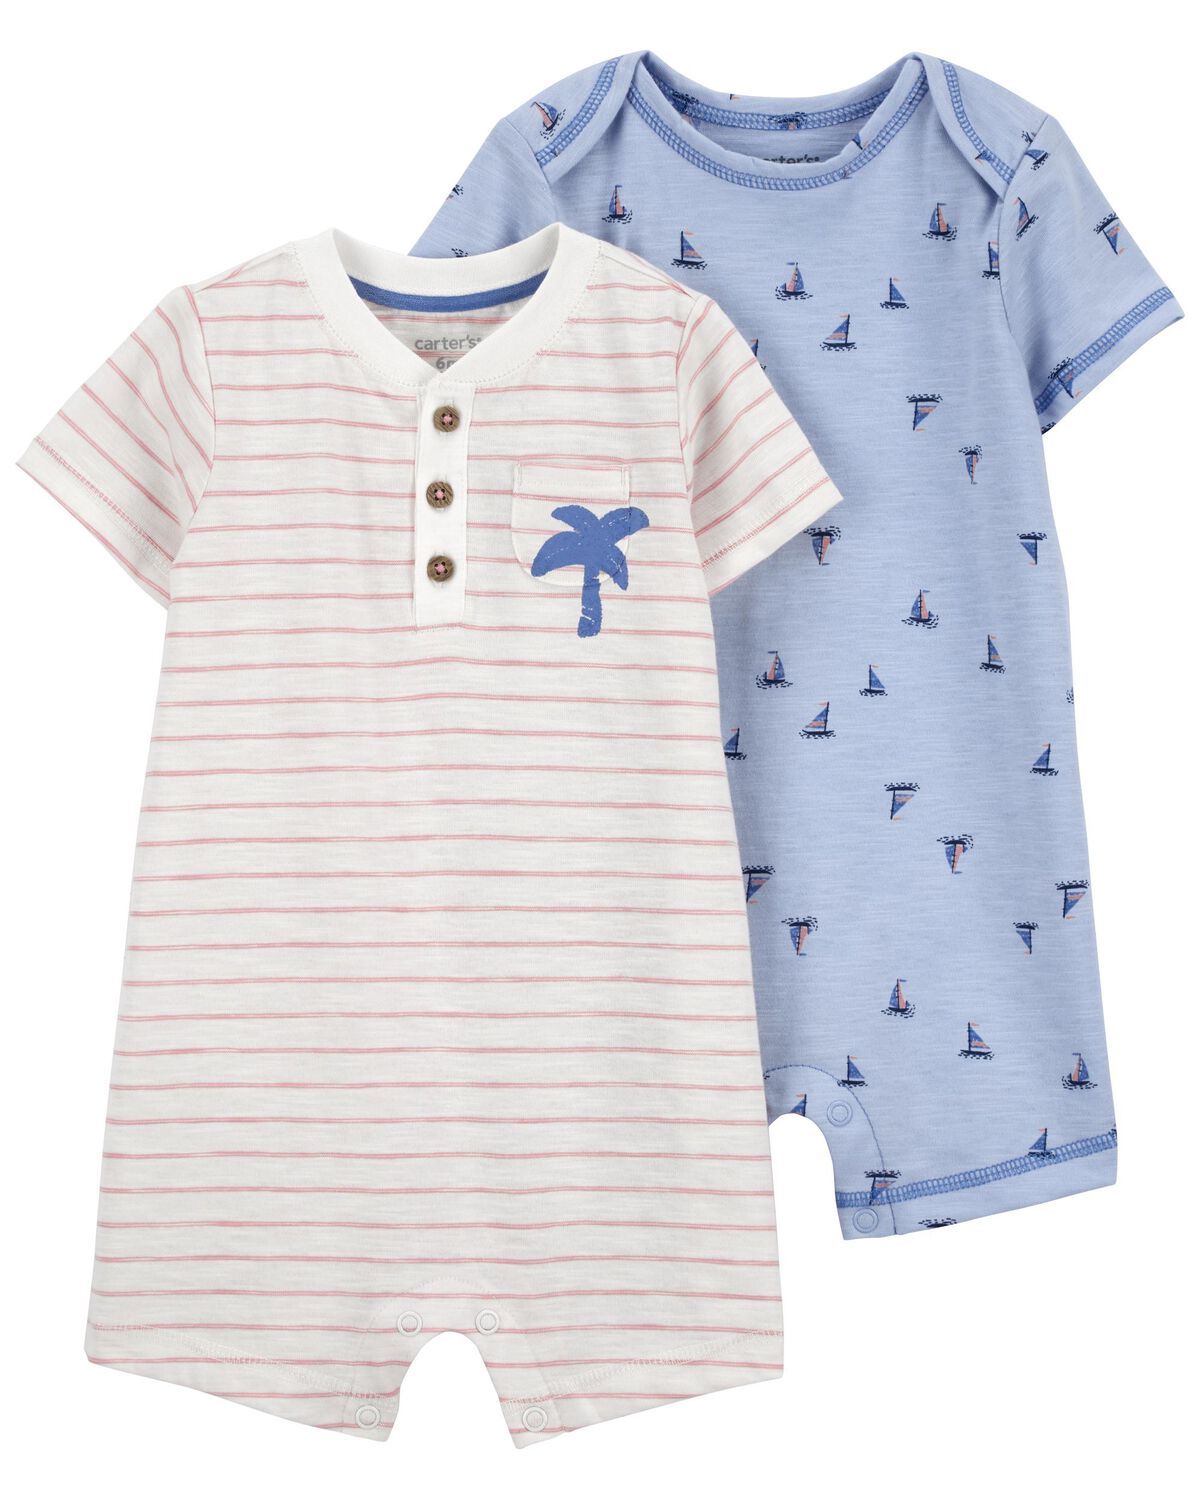 Blue/Pink Baby 2-Pack Cotton Rompers | carters.com | Carter's